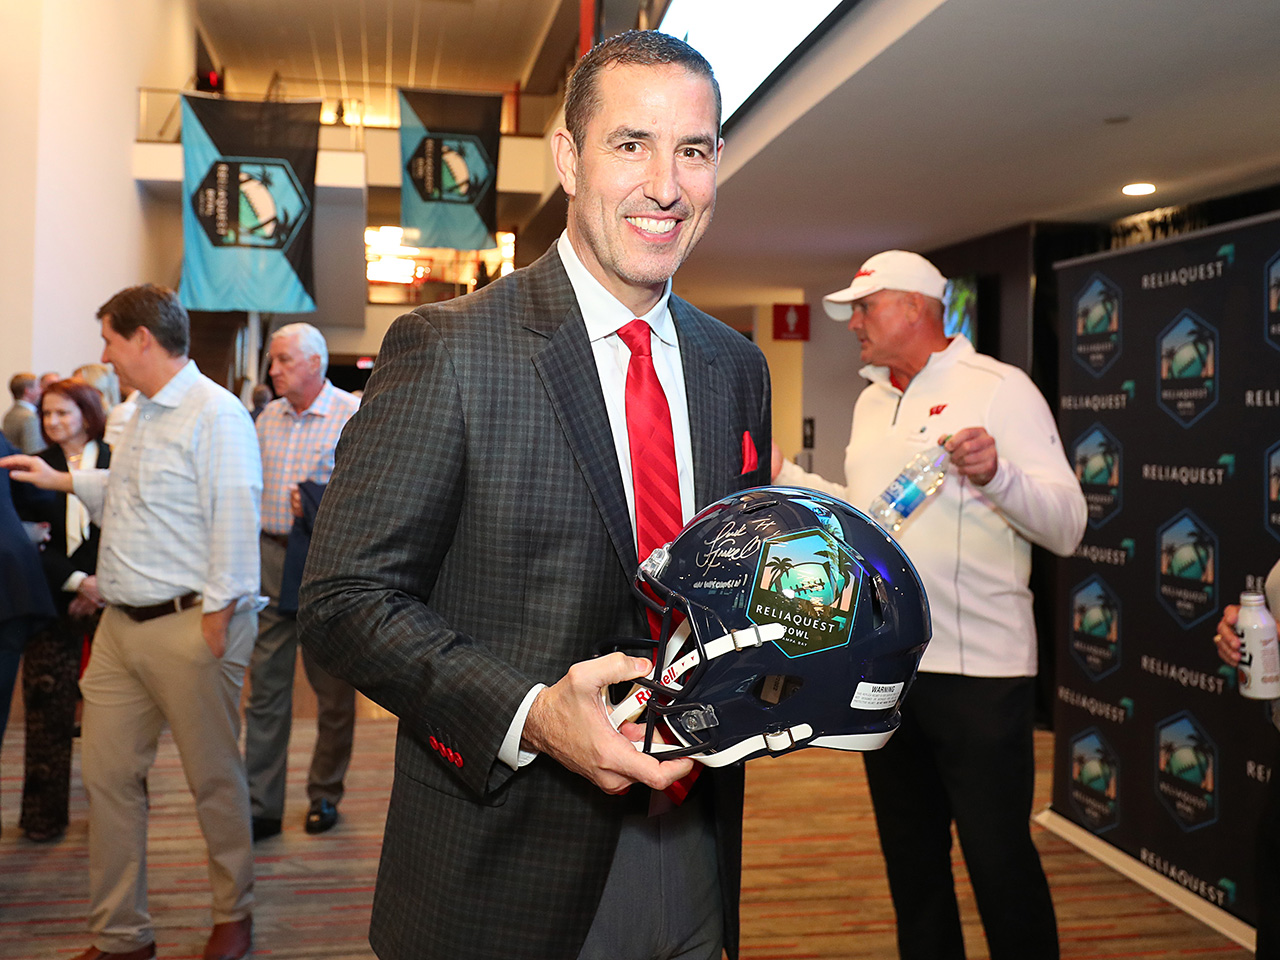 Coach Fickell signs a Bowl Helmet for a lucky guest